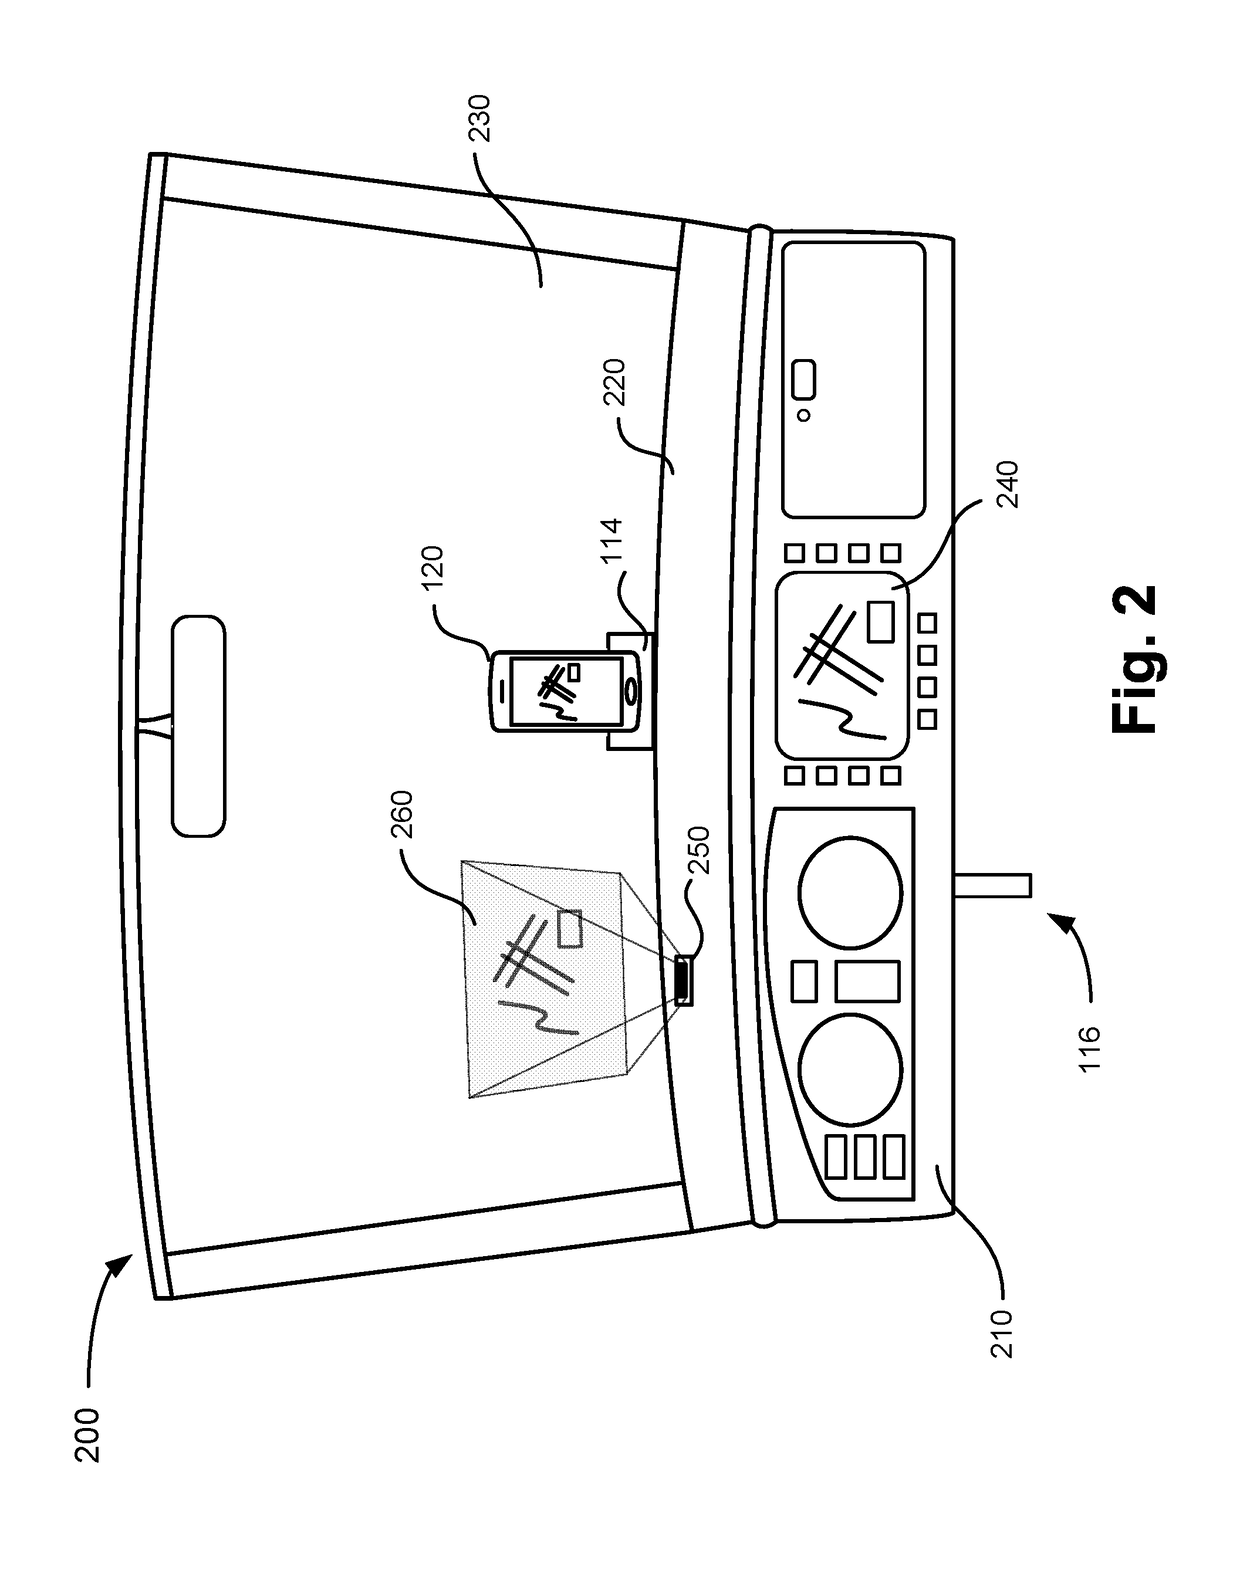 Systems and methods for streaming video from a rear view backup camera